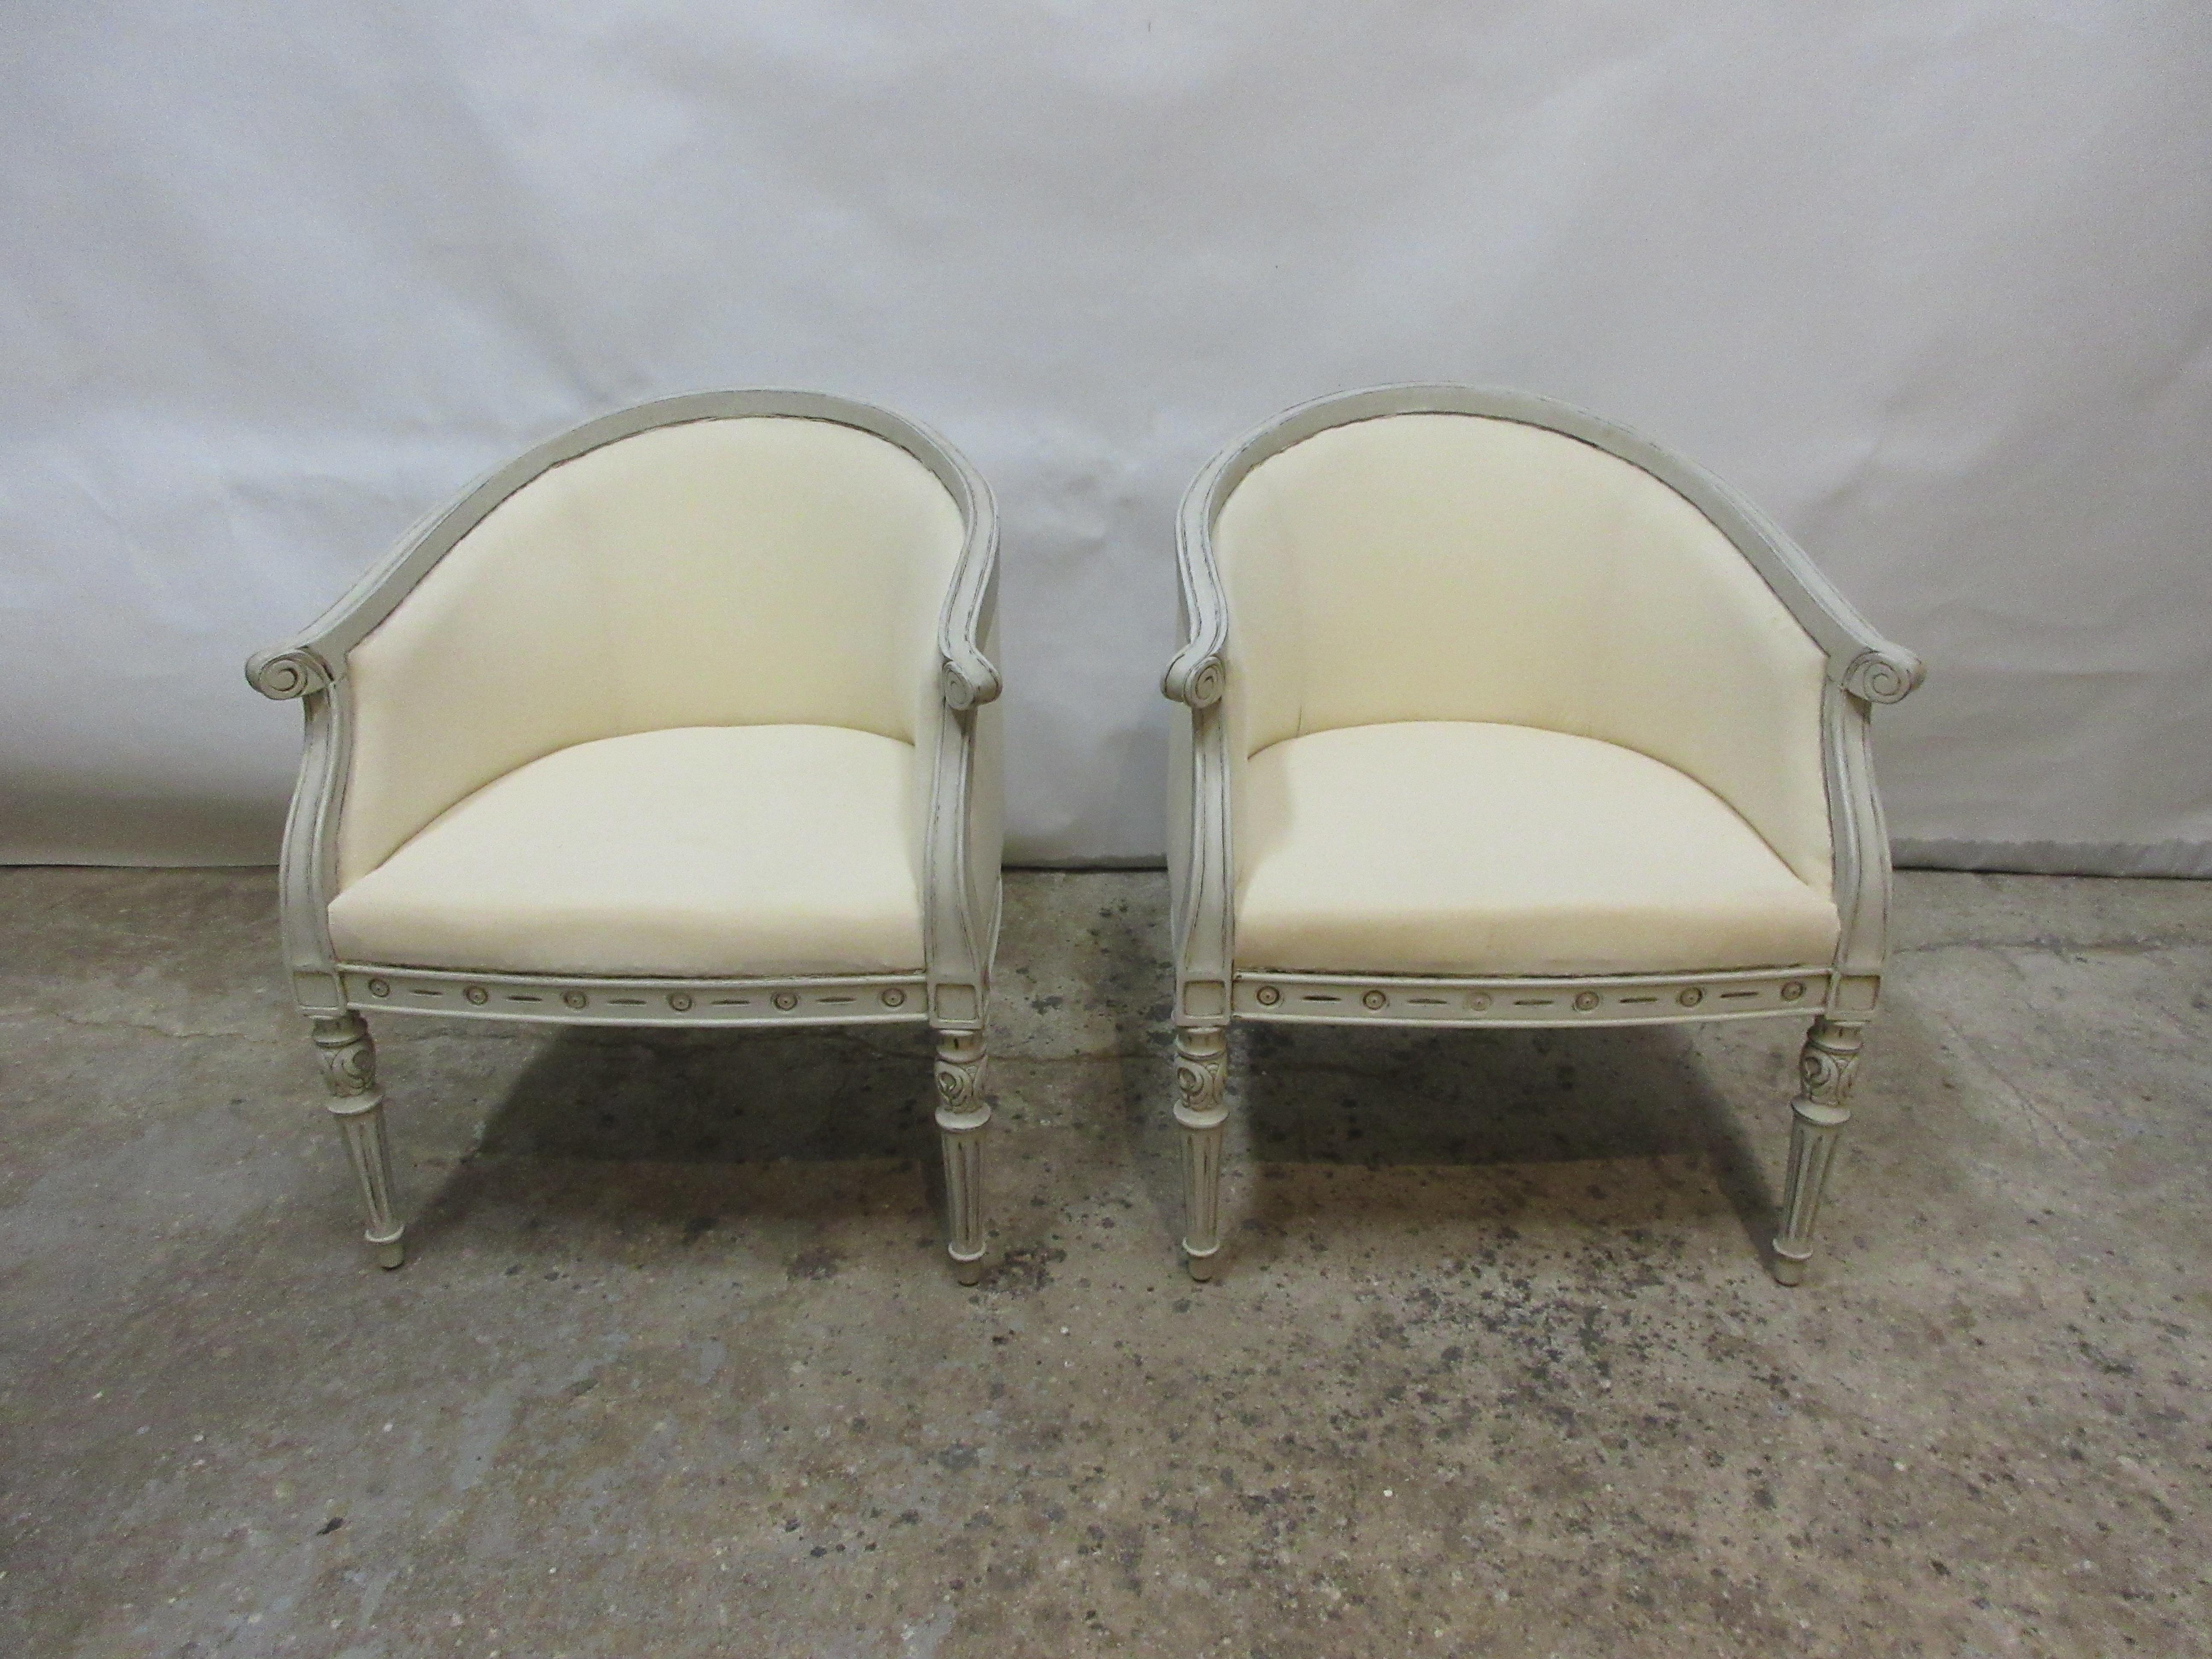 This is a set of 2 Swedish Gustavian Barrel chairs. They have been restored and repainted with milk paints 